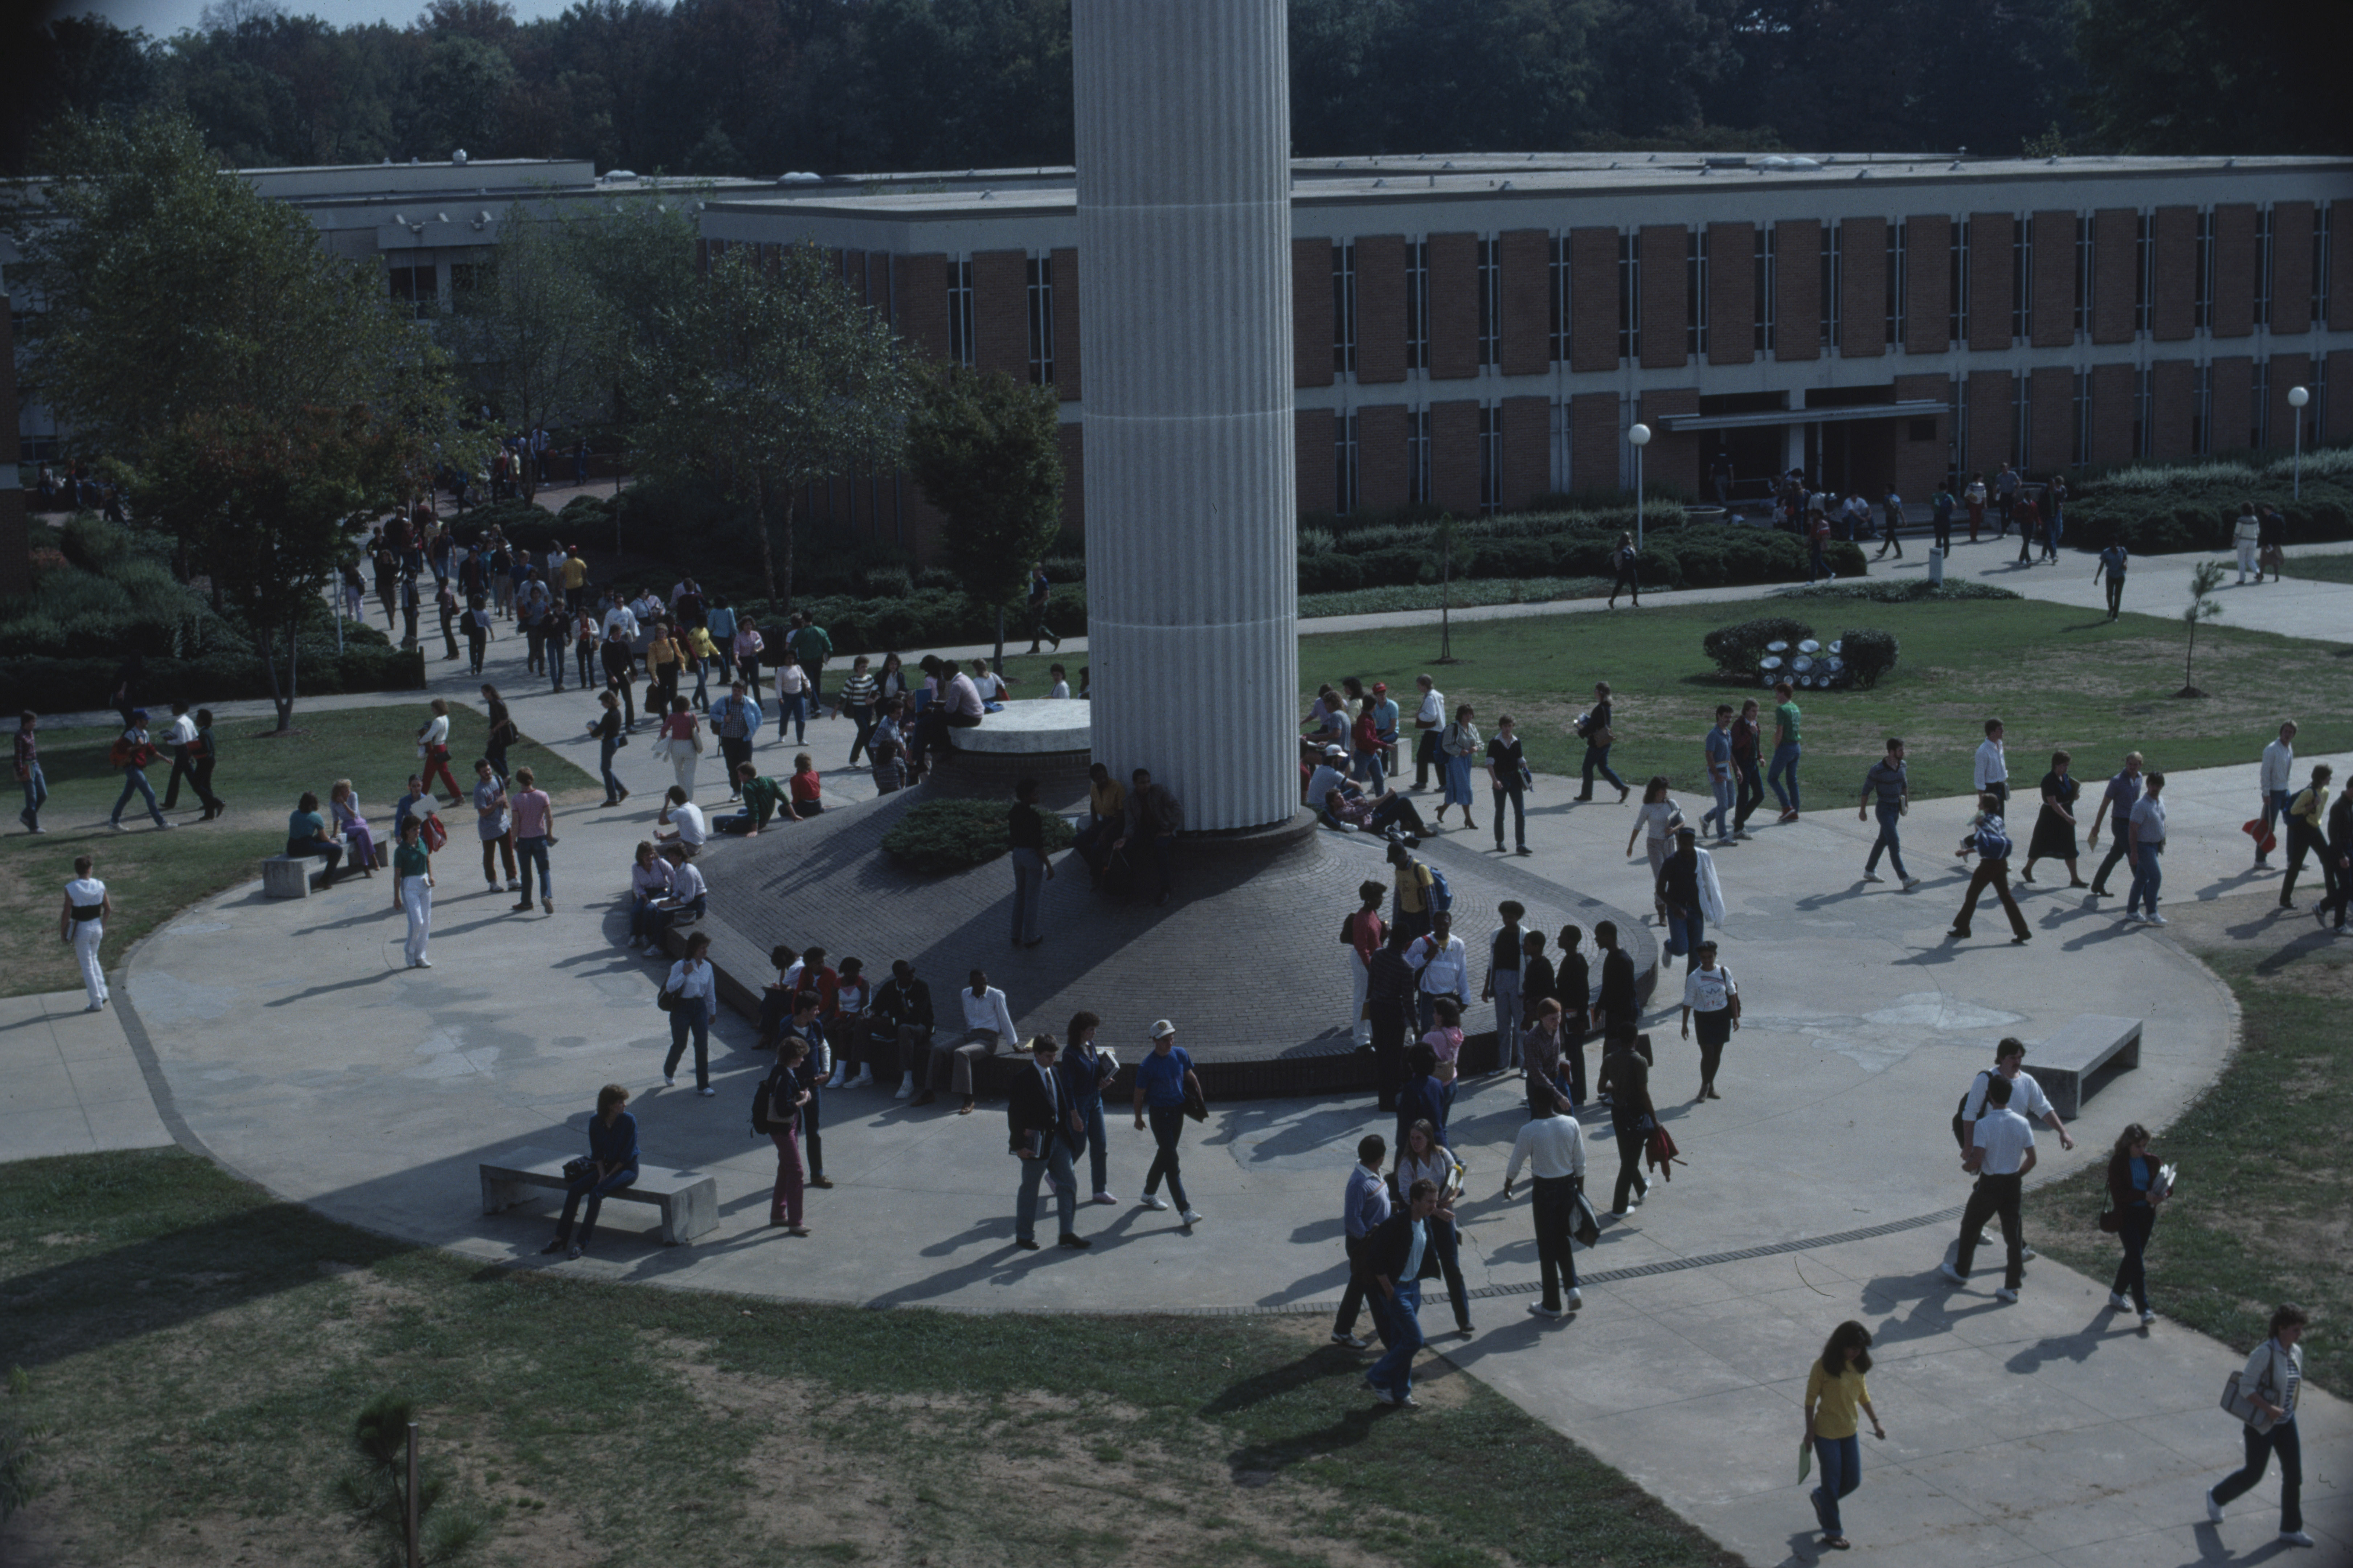 Elevated view of the base of the Belk Bell Tower from around the 1970s-1980s. Many students walk on the path around the base, and a building can be seen in the background.